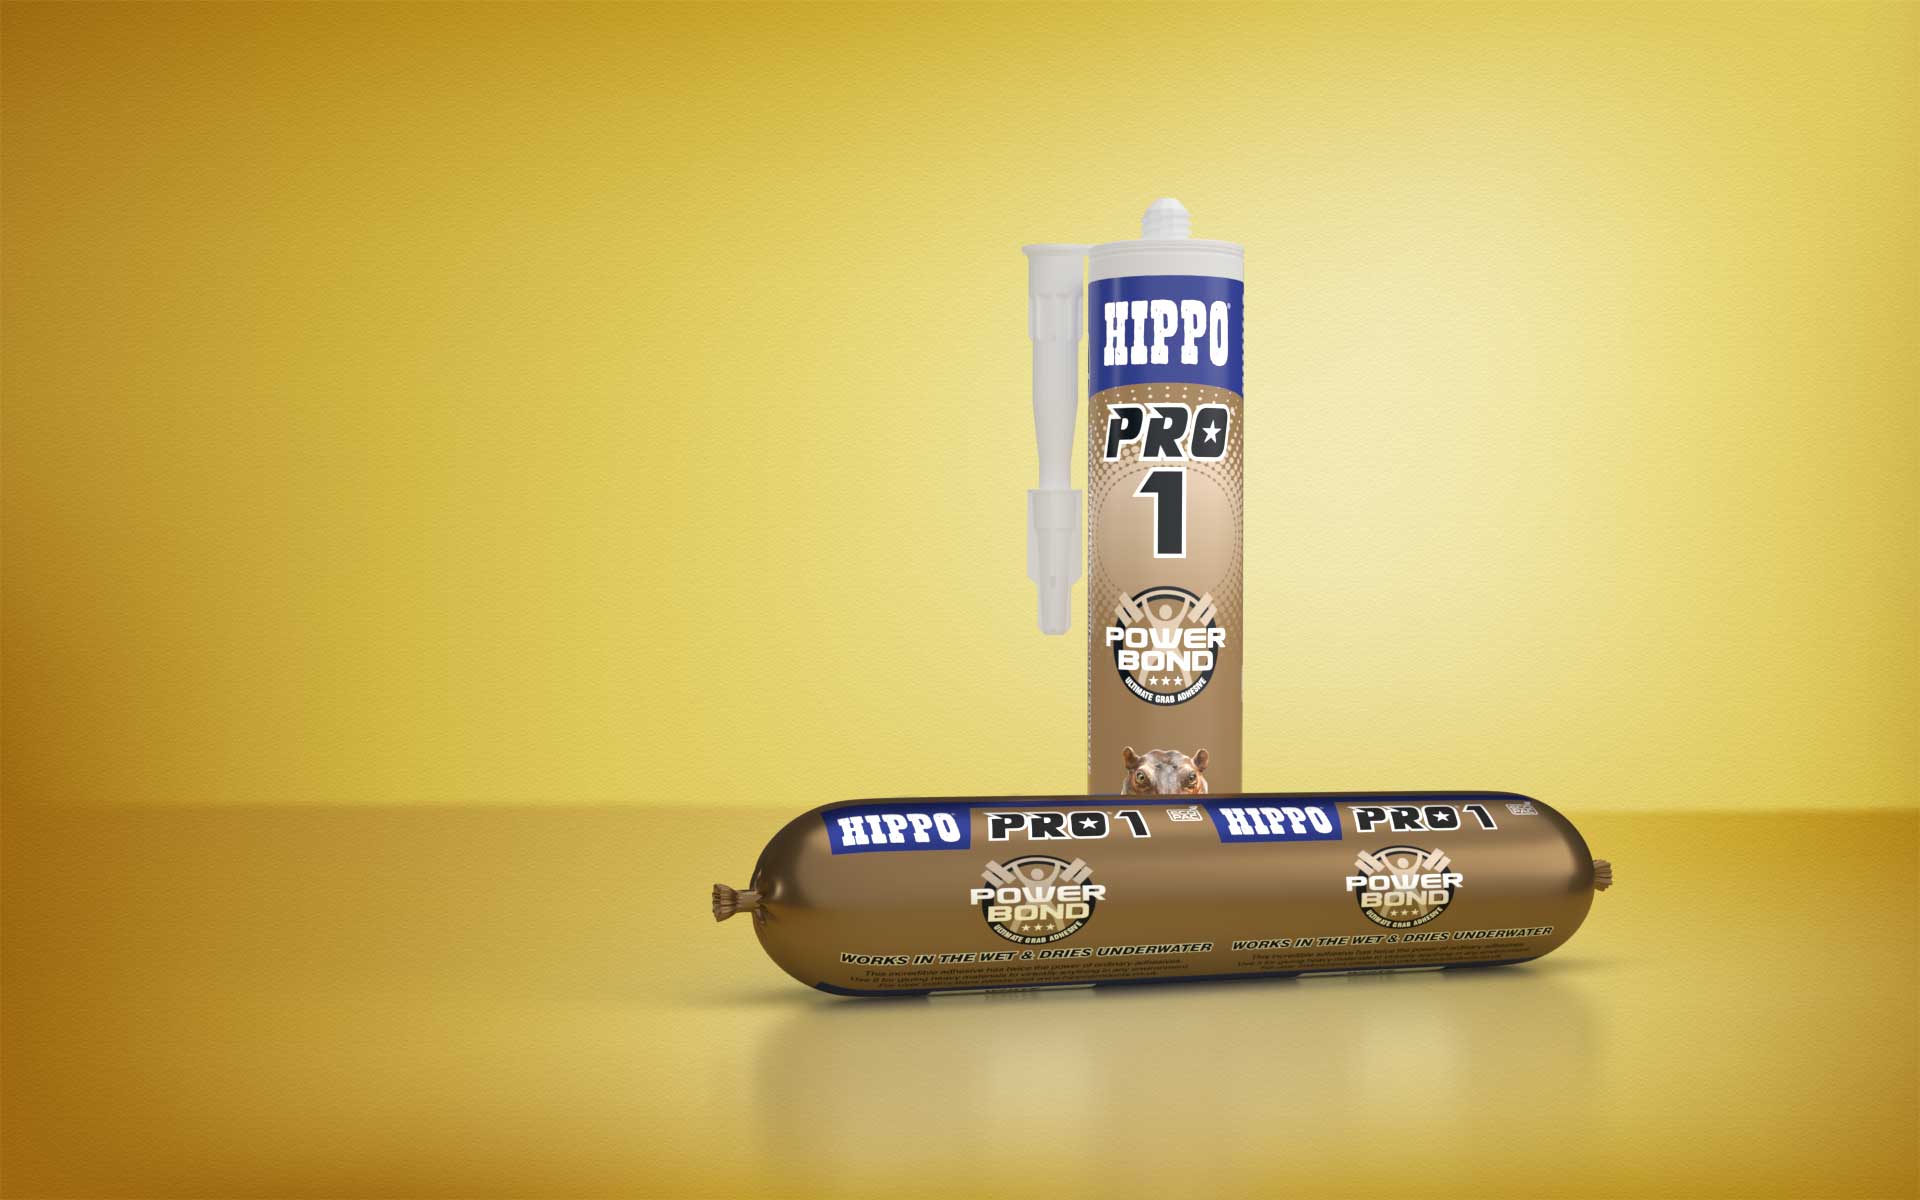 The Incredible Hippo PRO1 Power Bond Adhesive